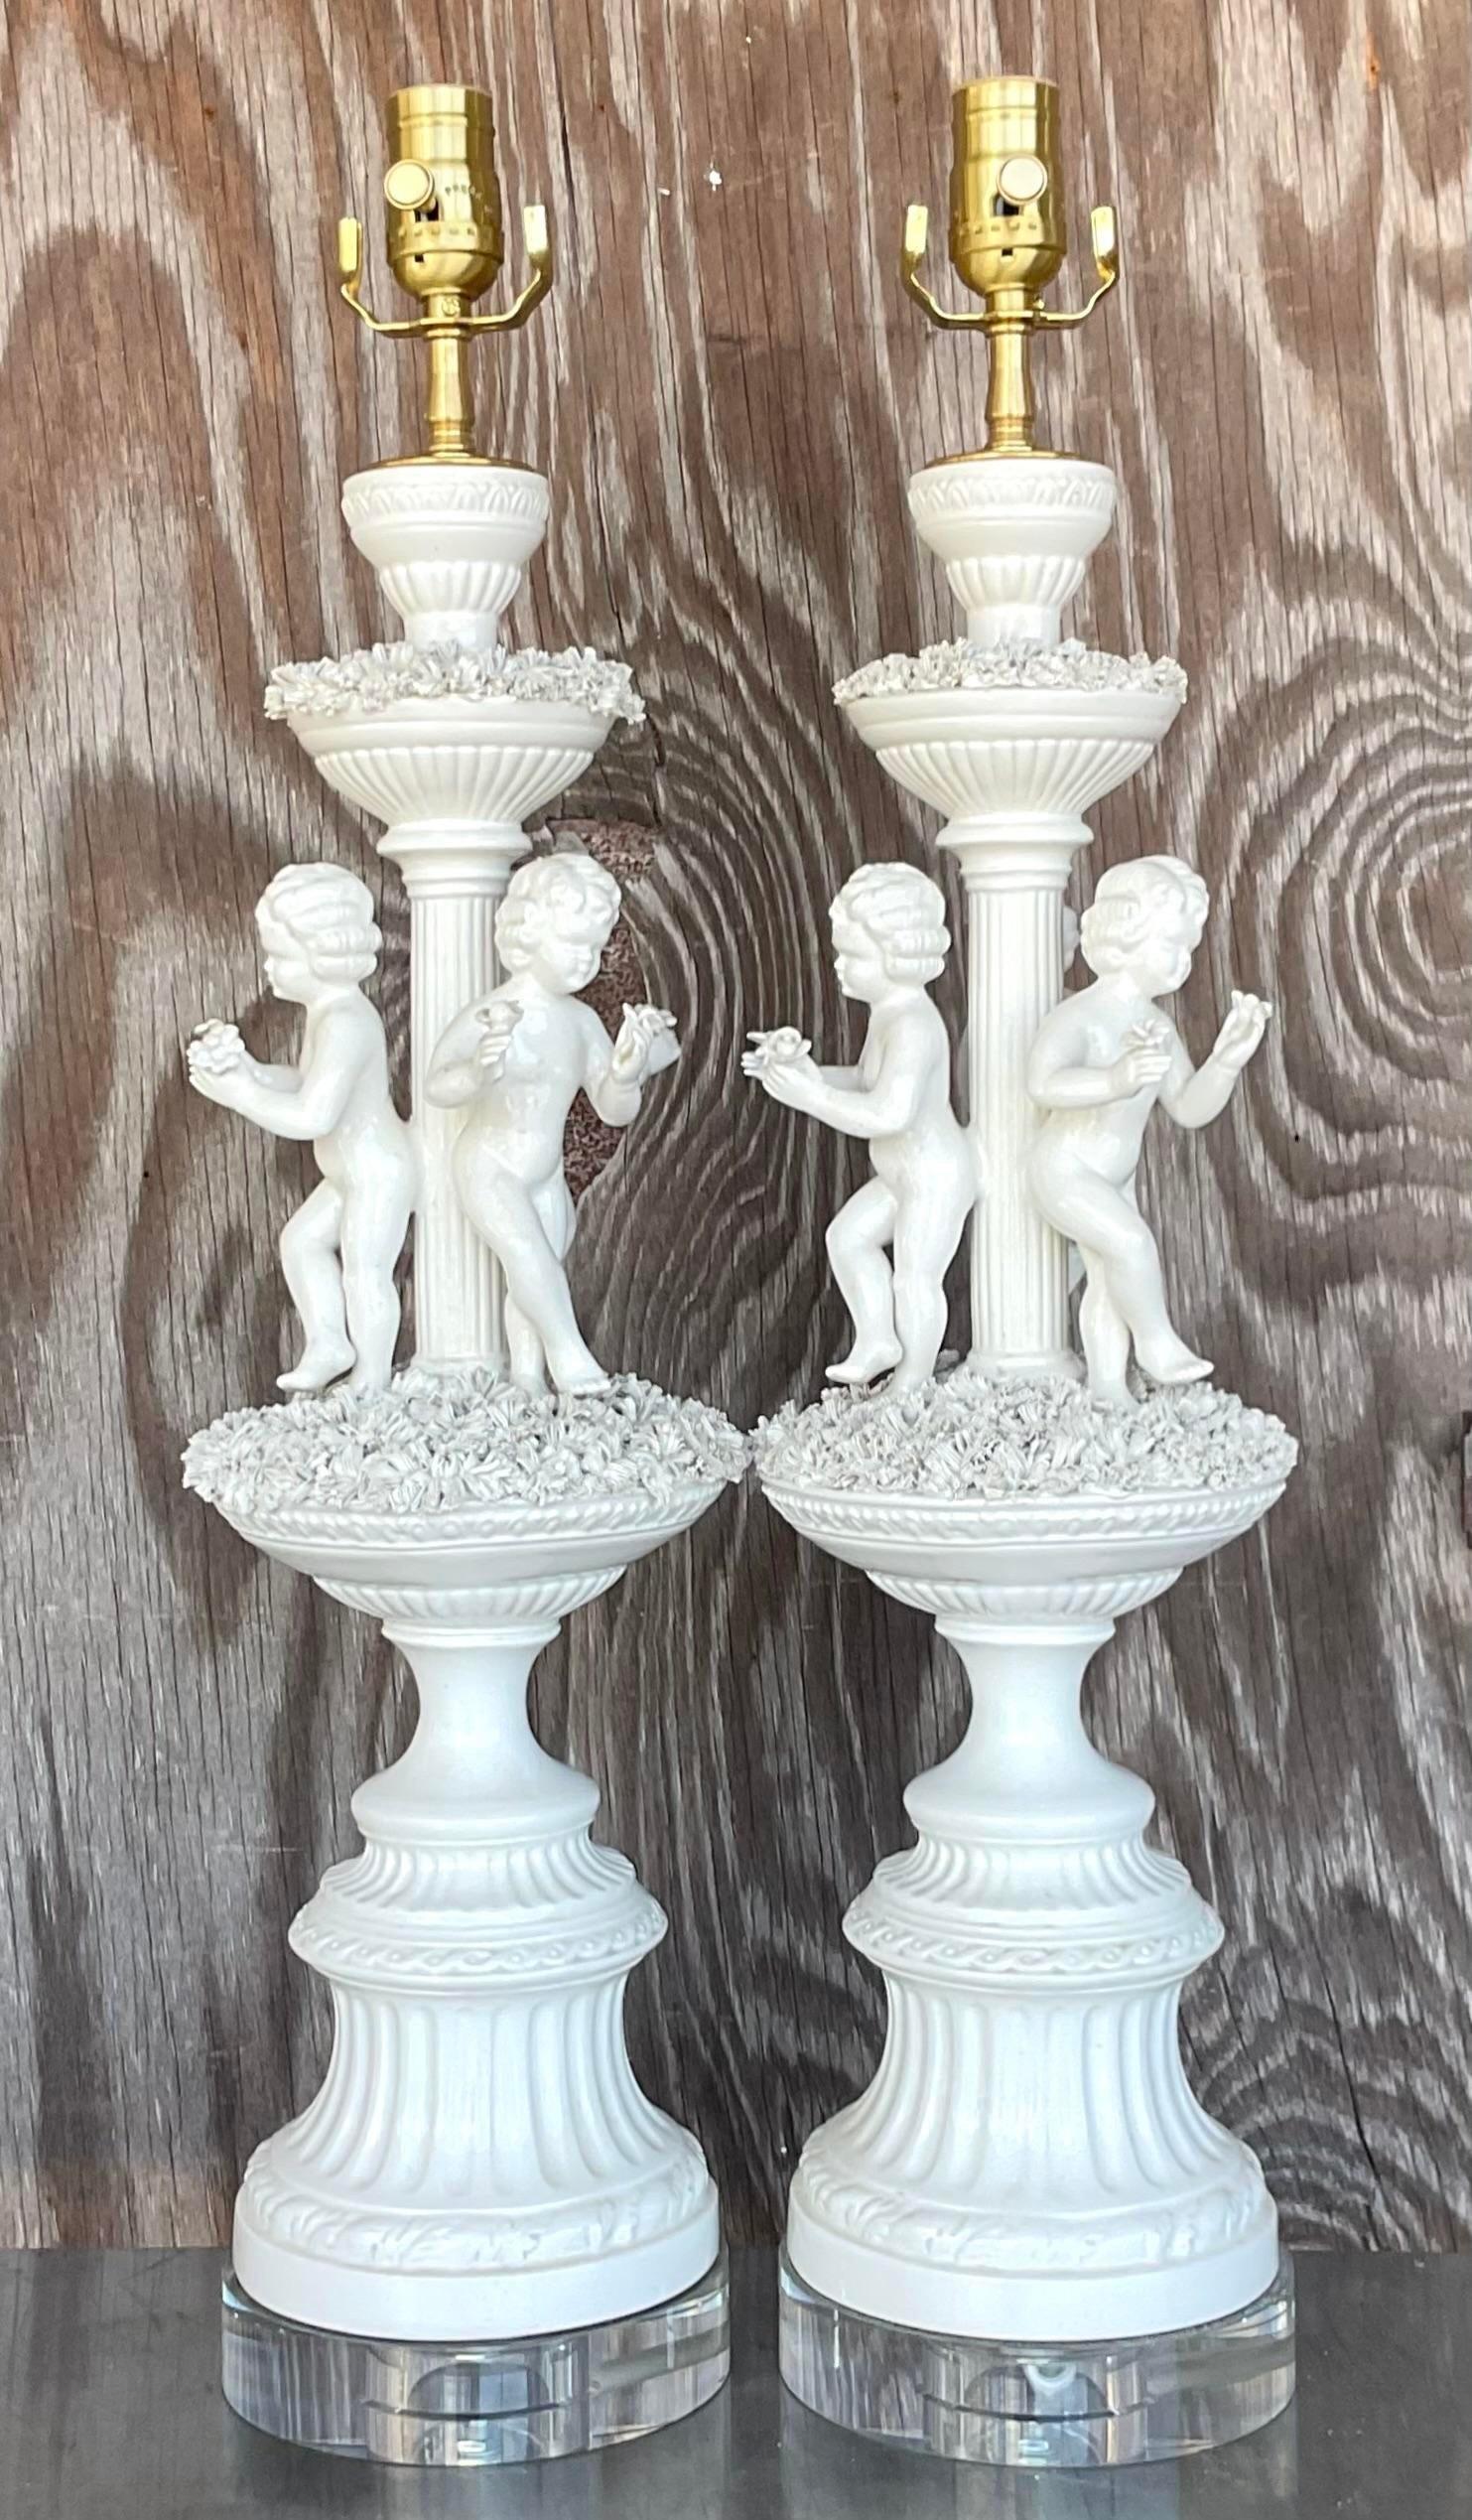 Vintage Regency Glazed Ceramic Putti Style Lamps - a Pair In Good Condition For Sale In west palm beach, FL